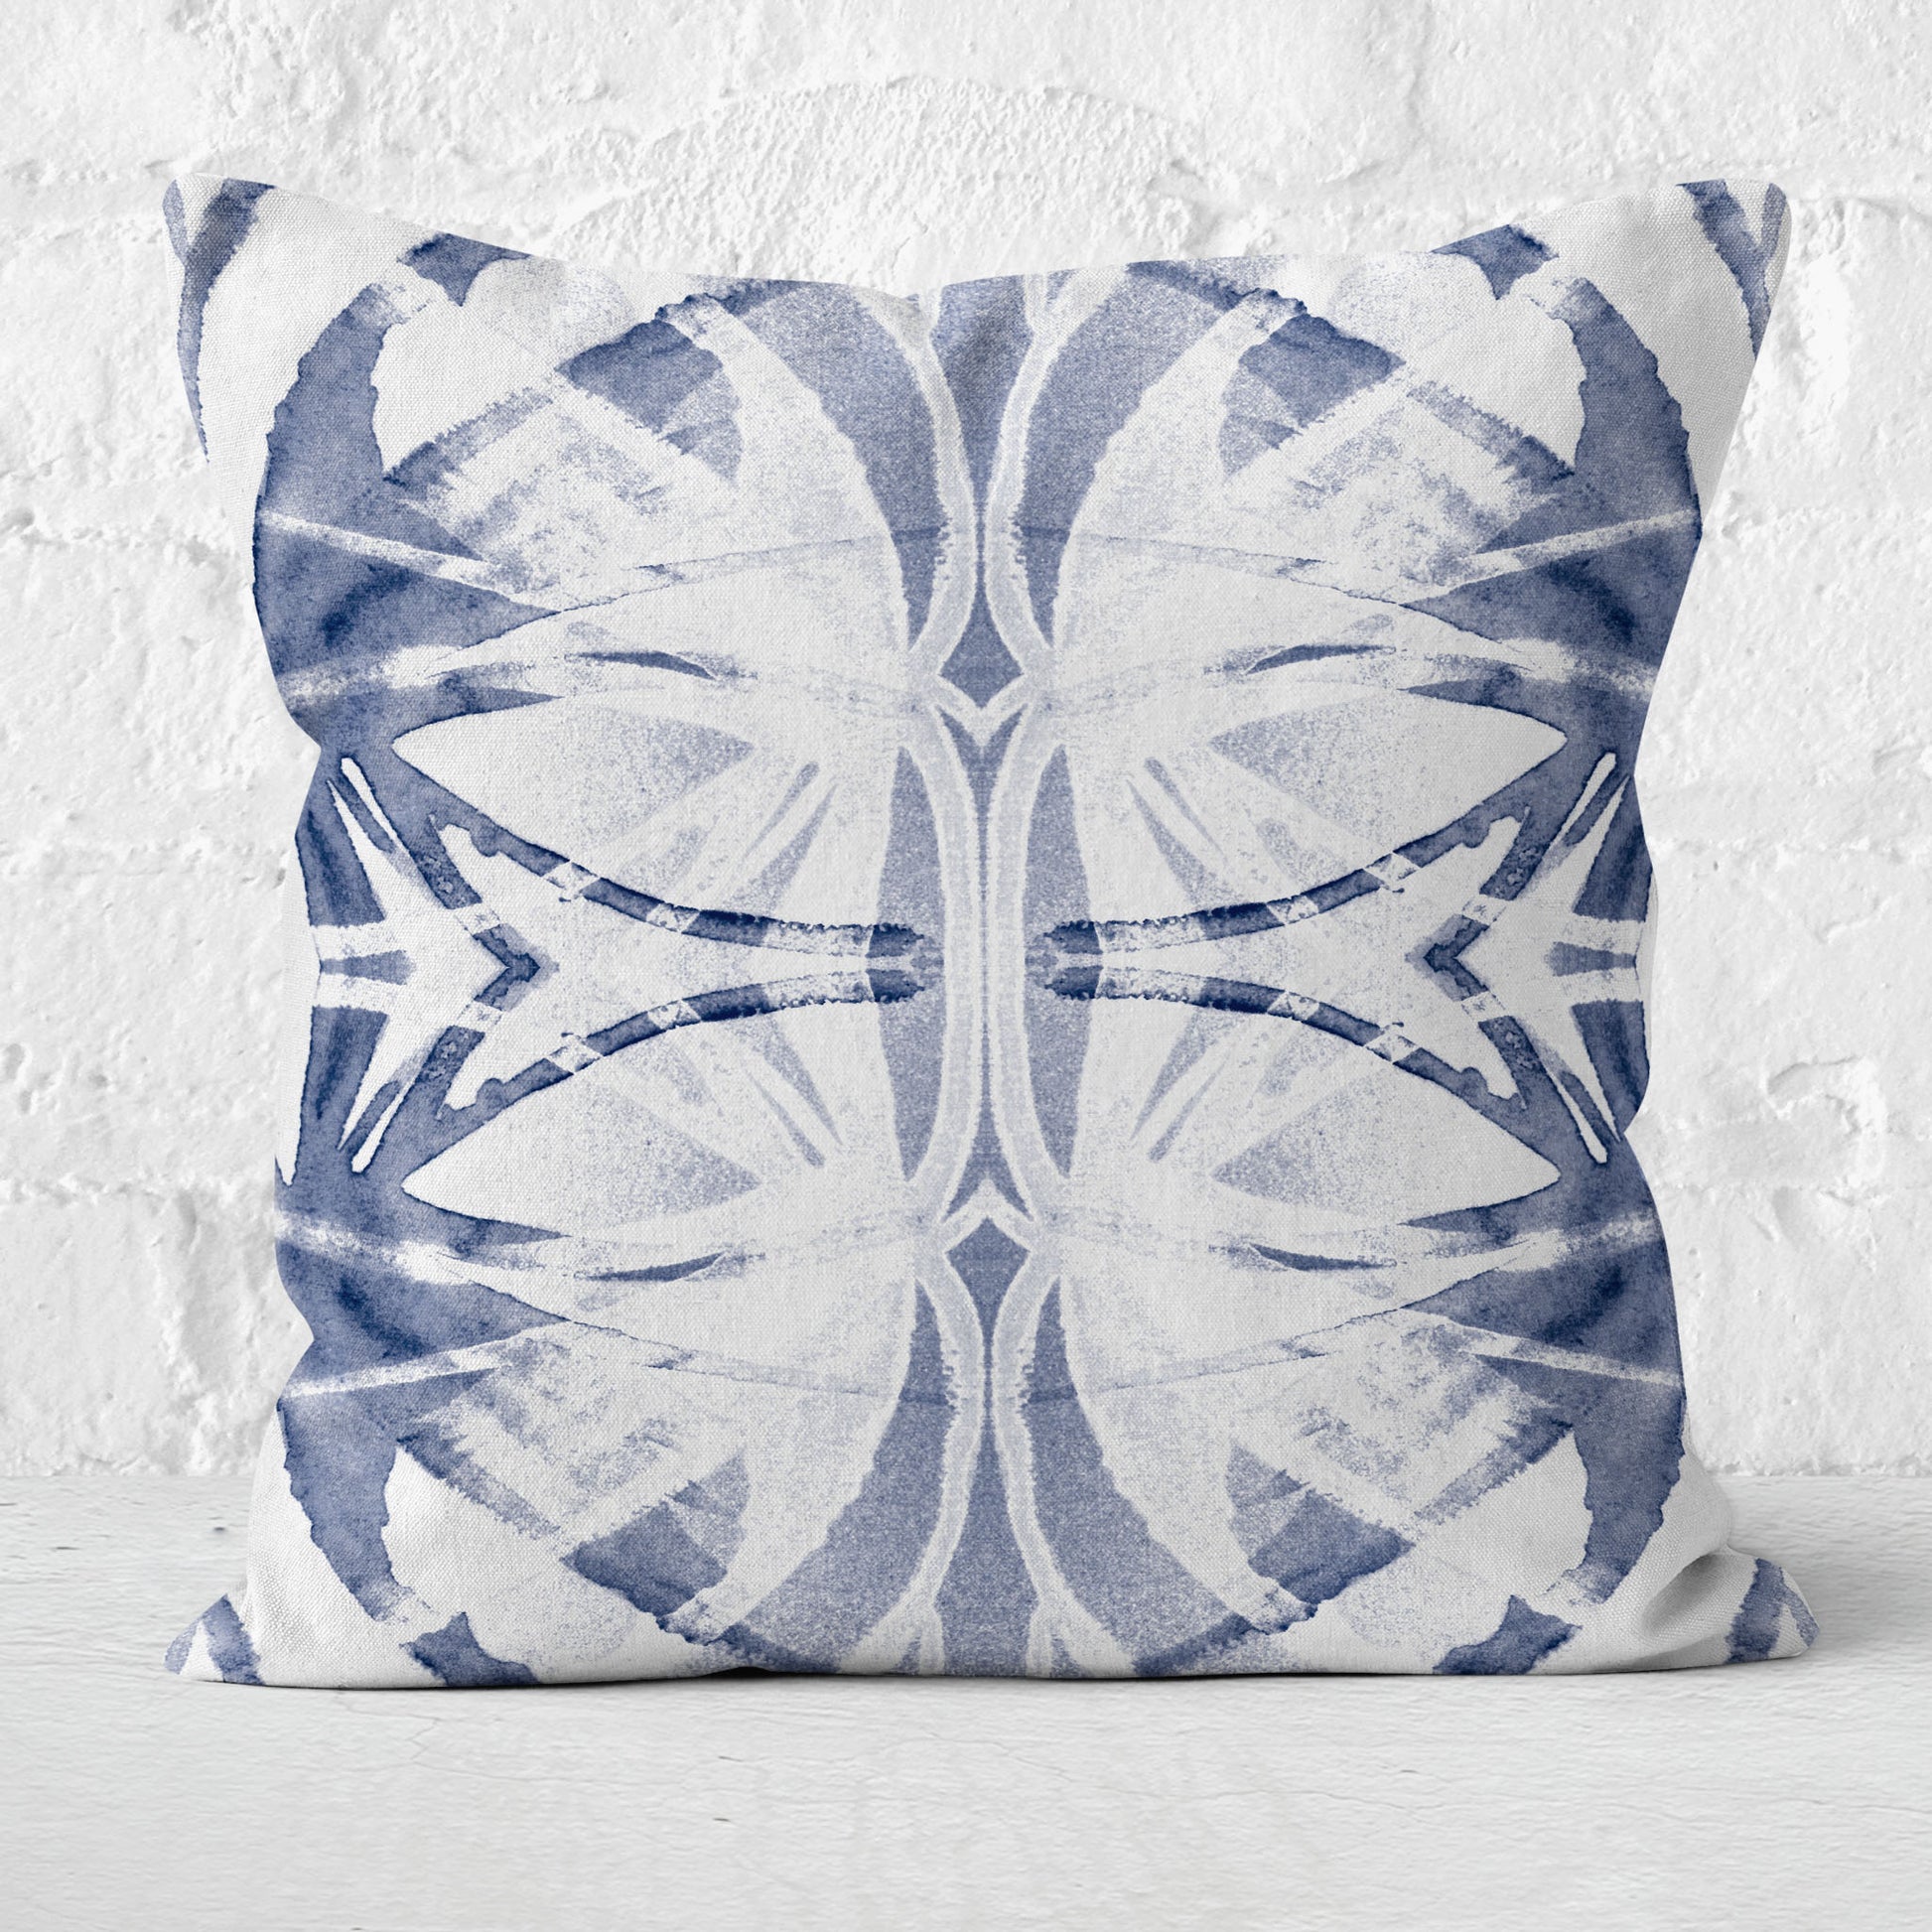 Throw pillow featuring an abstract blue watercolor pattern on a white brick background